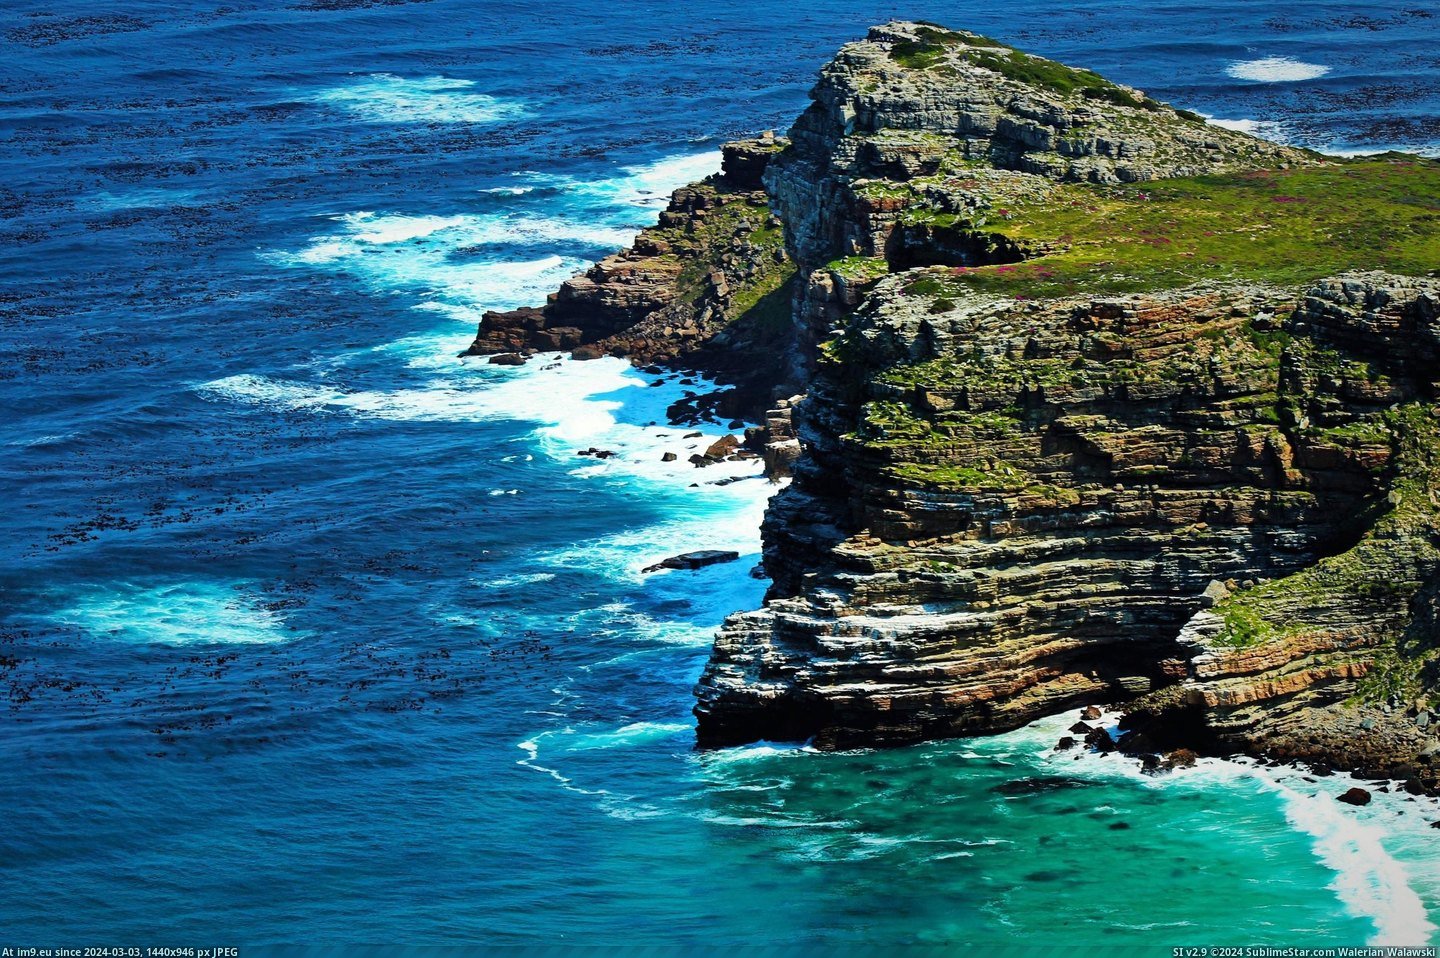 #Good #Beautiful #May #Africa #Cape #Southern #Tip #Hope #South #Place [Earthporn] Cape of Good Hope may not be the most southern tip of Africa but it is indeed a beautiful place, South Africa  [2603 Pic. (Image of album My r/EARTHPORN favs))